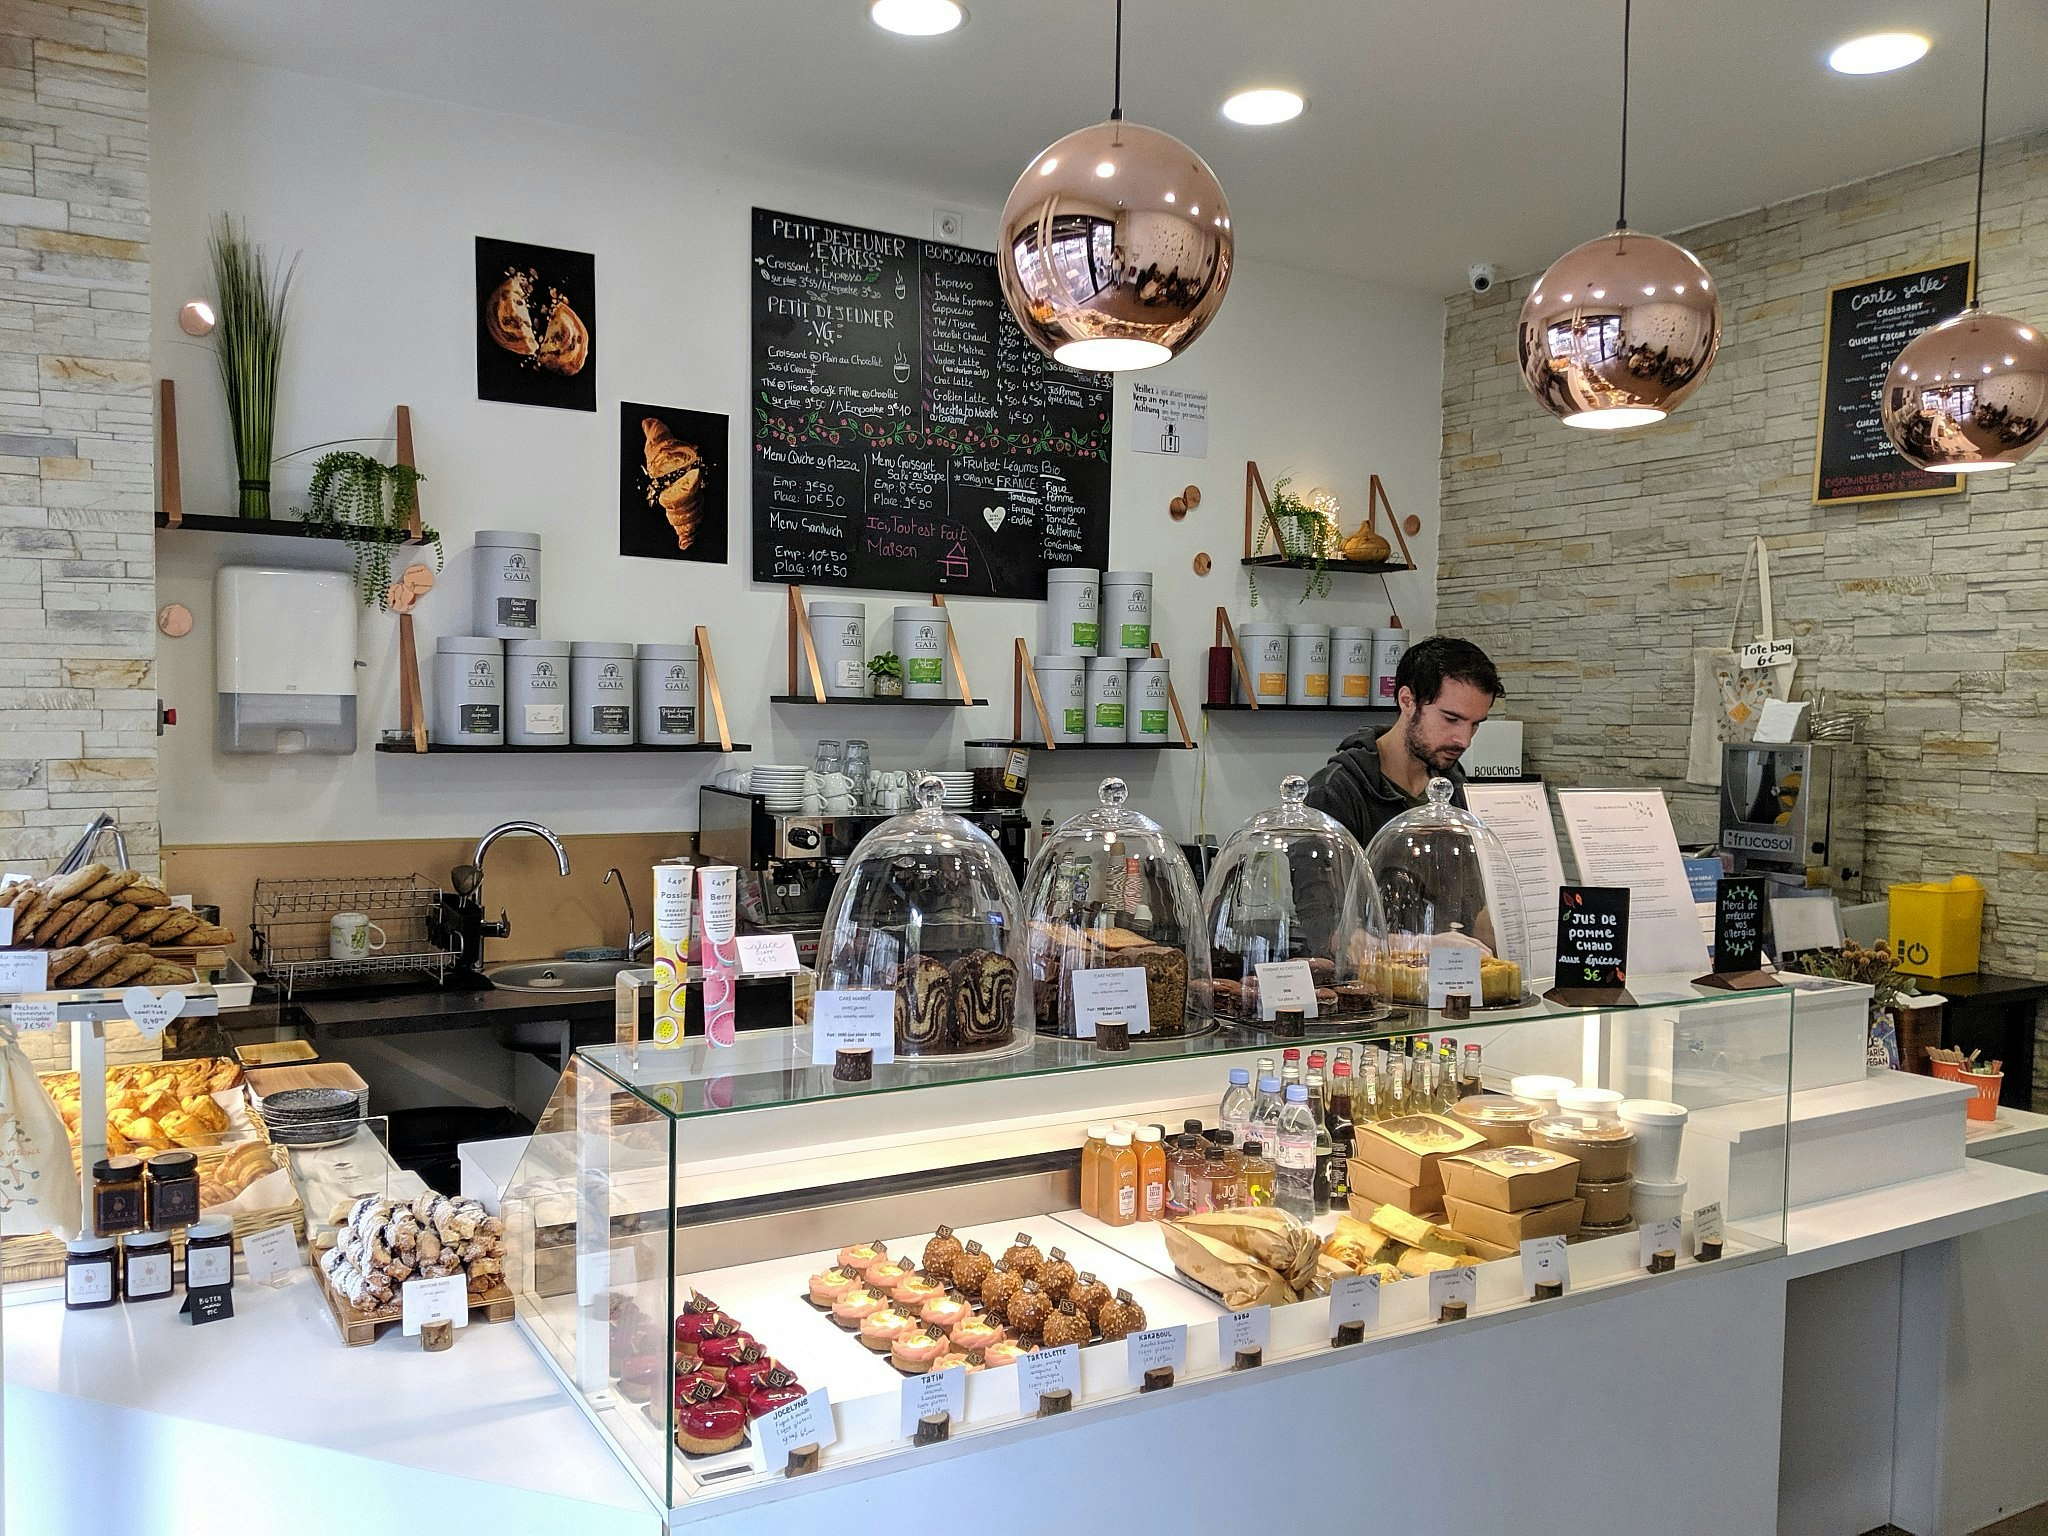 A worker behind a counter laden with cakes and sweet treats; walls are white or exposed brick with metal lights hanging from above. 